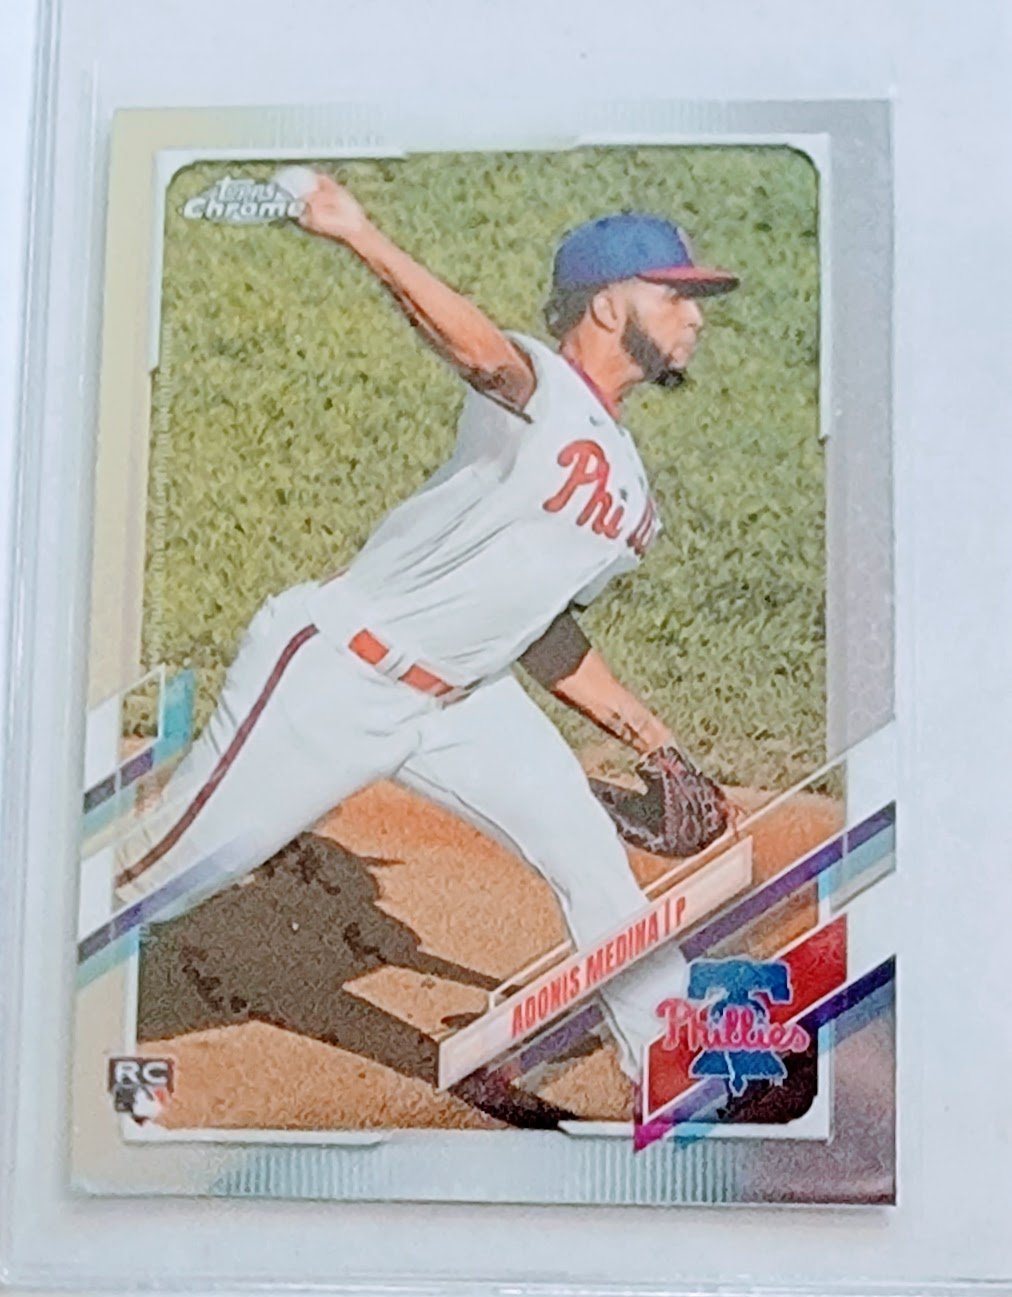 2021 Topps Chrome Adonis Medina Rookie Baseball Card TPTV simple Xclusive Collectibles   